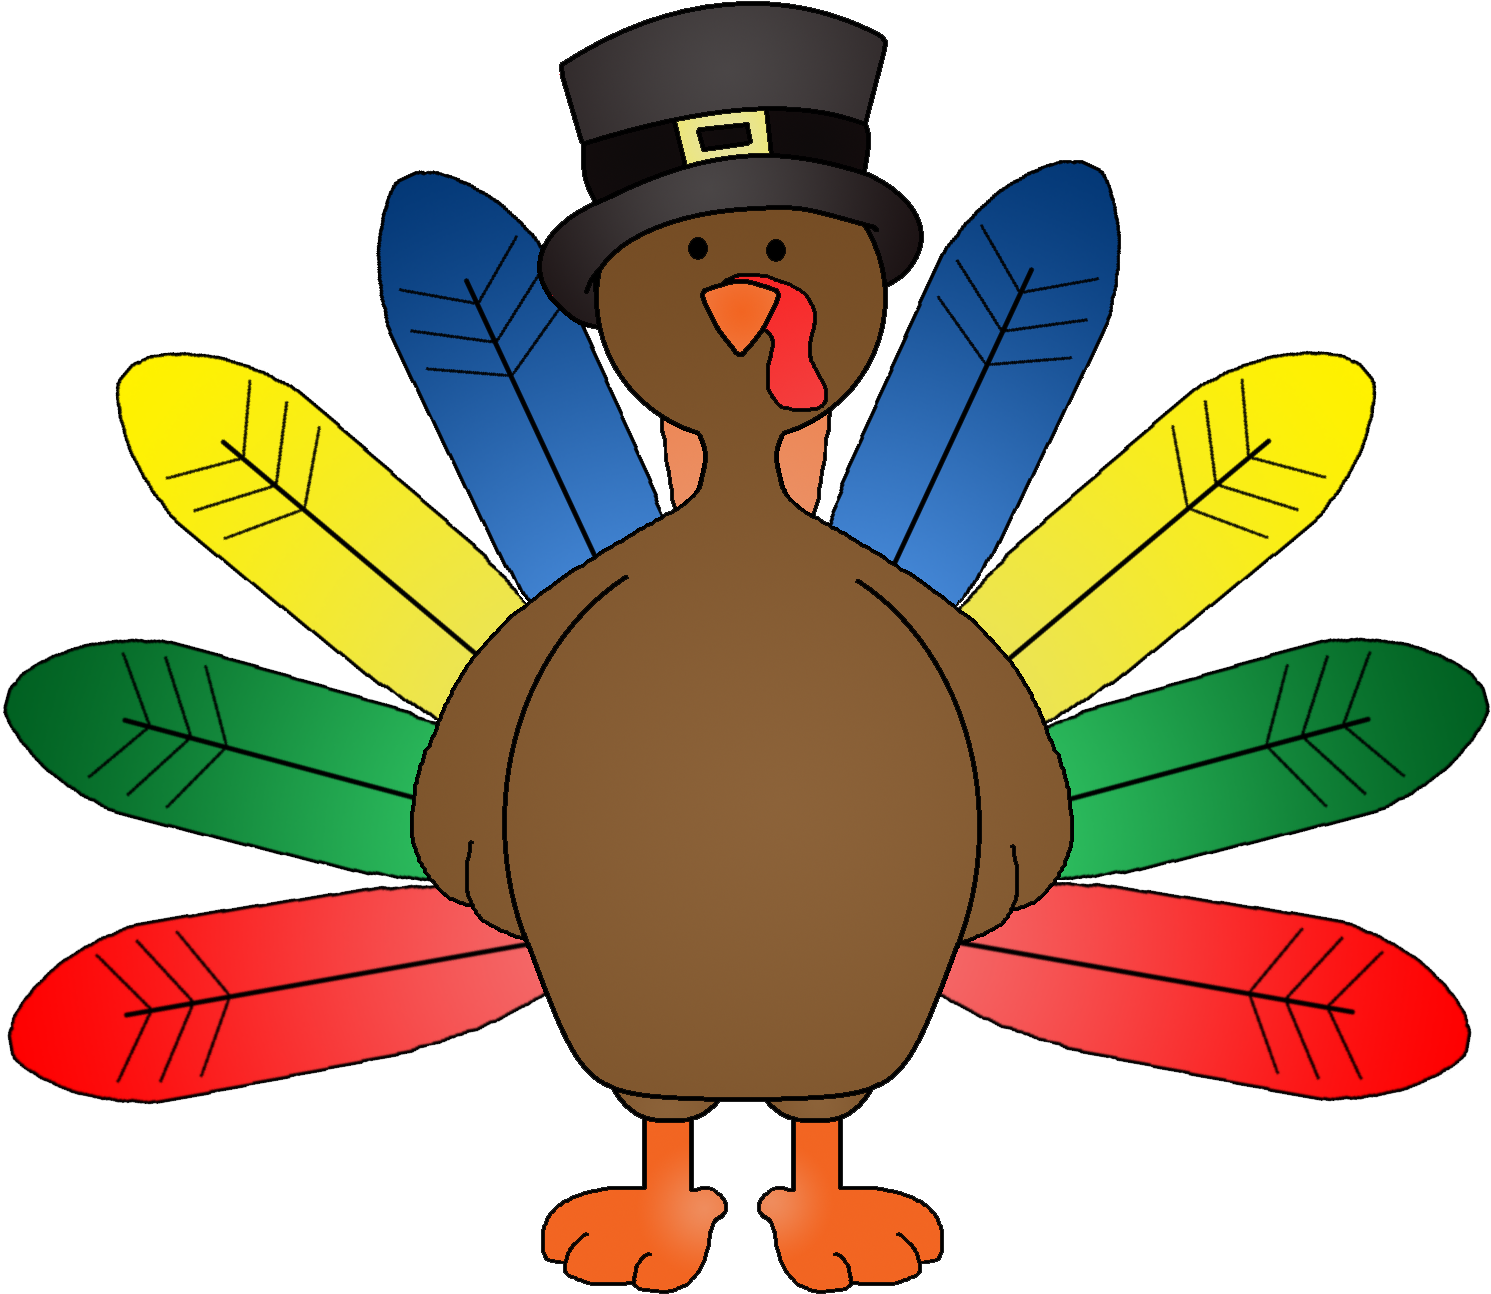 Thanksgiving Turkey Clip Art - Turkey With Colored Feathers (1521x1340)